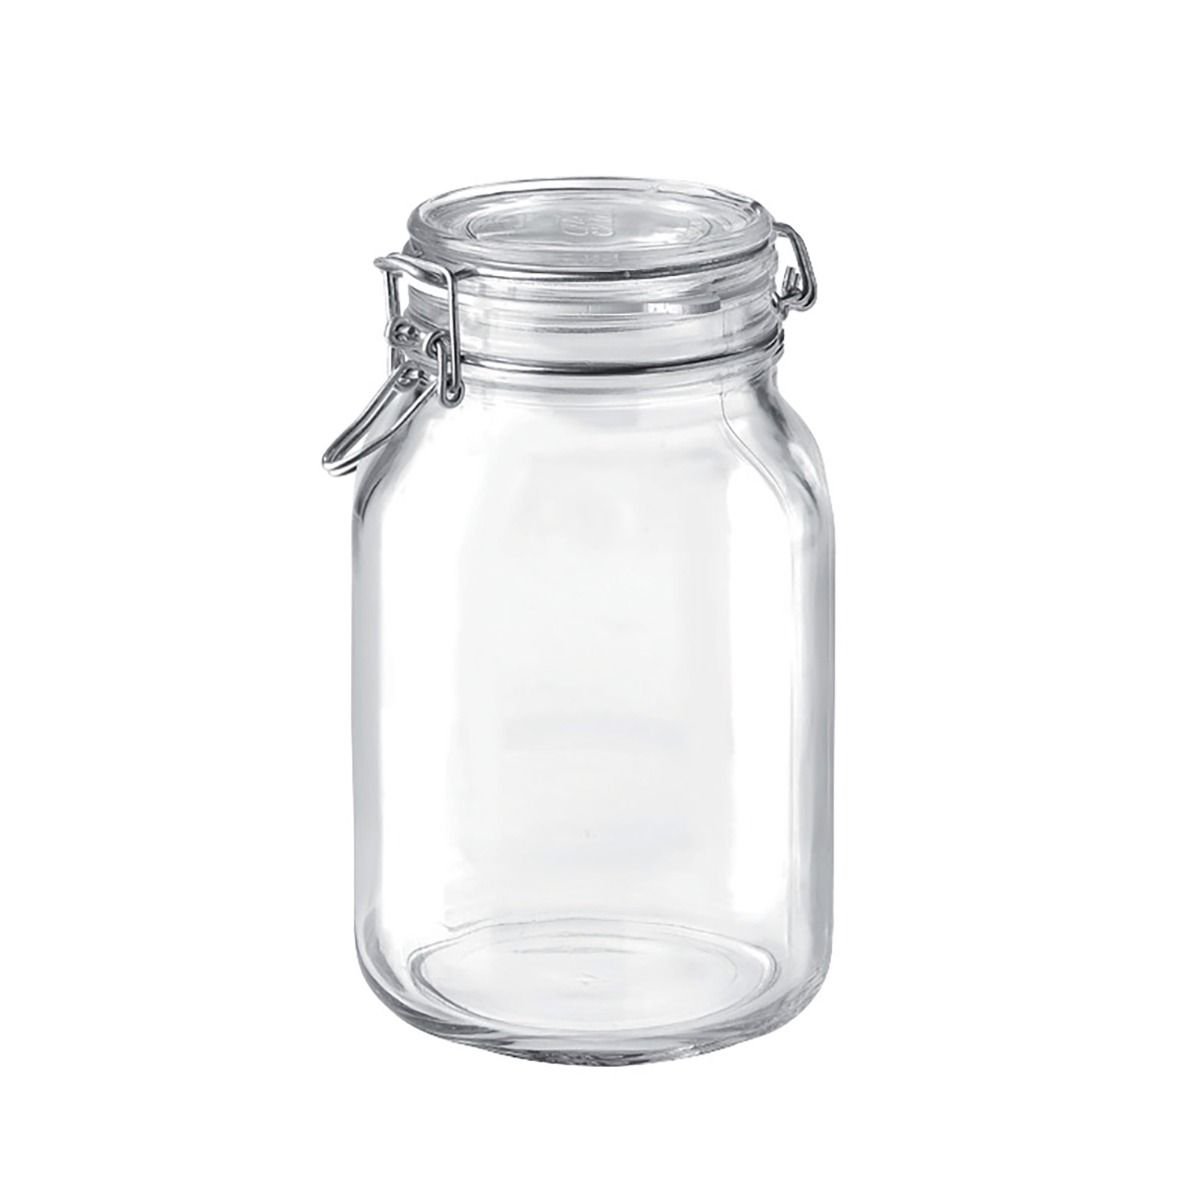 COUNTRY CLASSICS 6 oz. Mini Wide Mouth Glass Canning Jar (2 packs